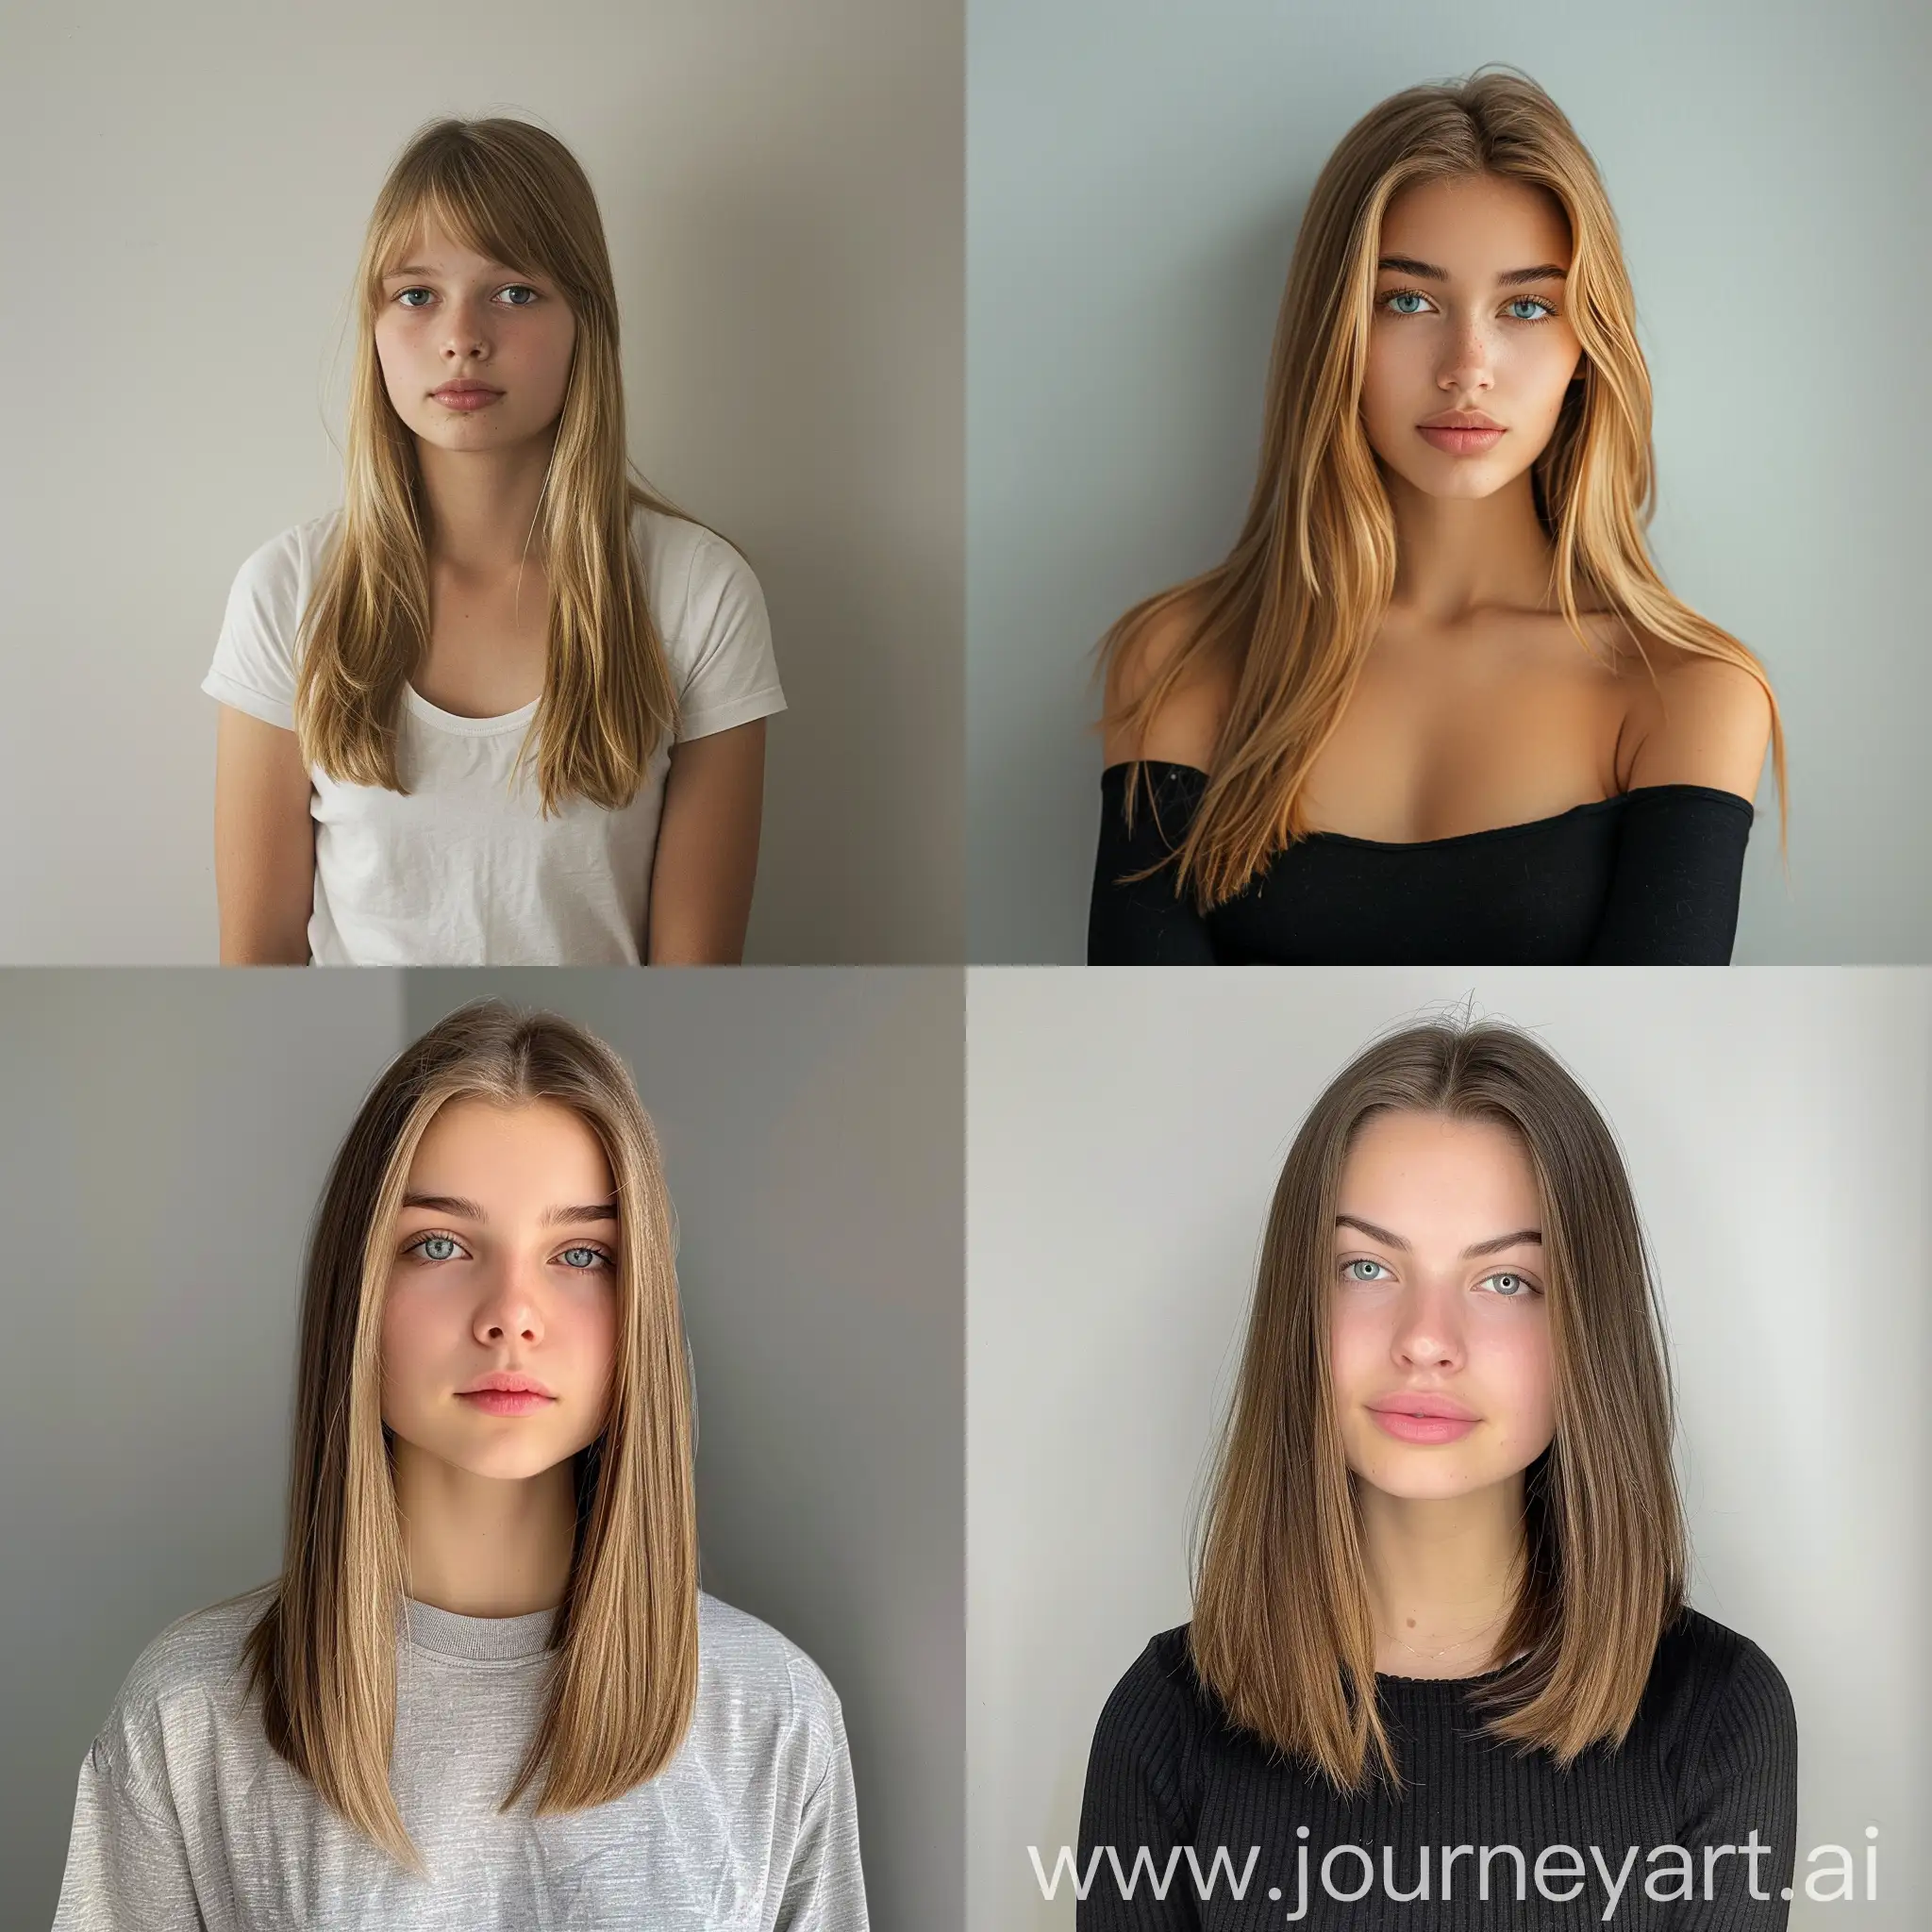 Captivating-Portrait-of-a-Girl-with-Straight-Hair